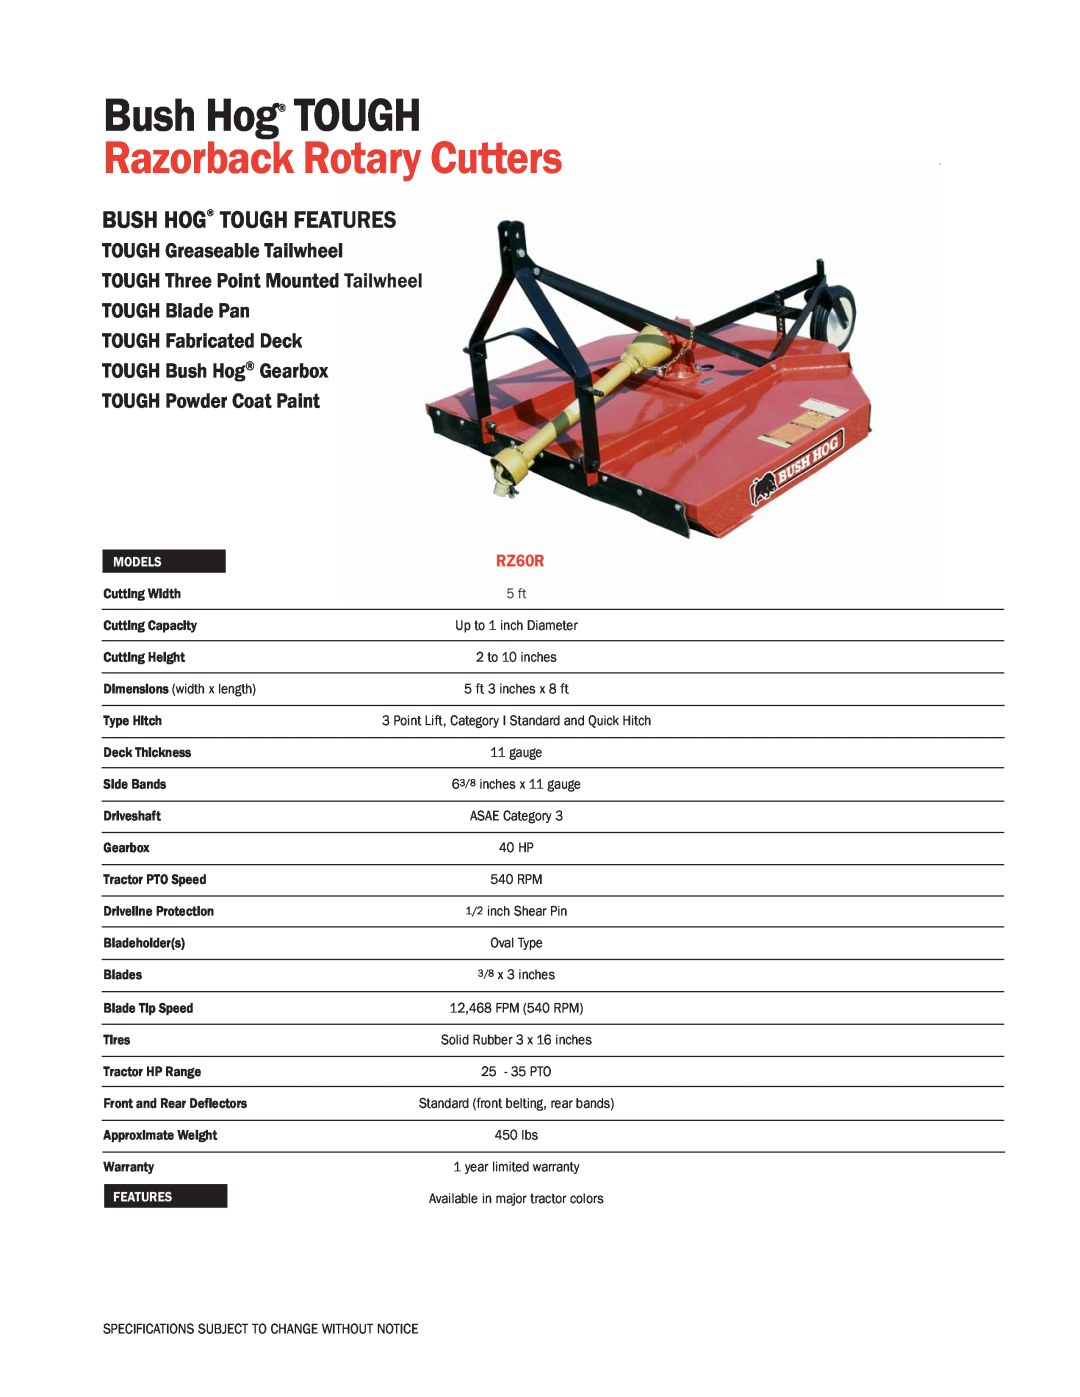 Bush Hog RZ60R specifications Razorback Rotary Cutters, Bush Hog TOUGH Features, TOUGH Greaseable Tailwheel, Models 